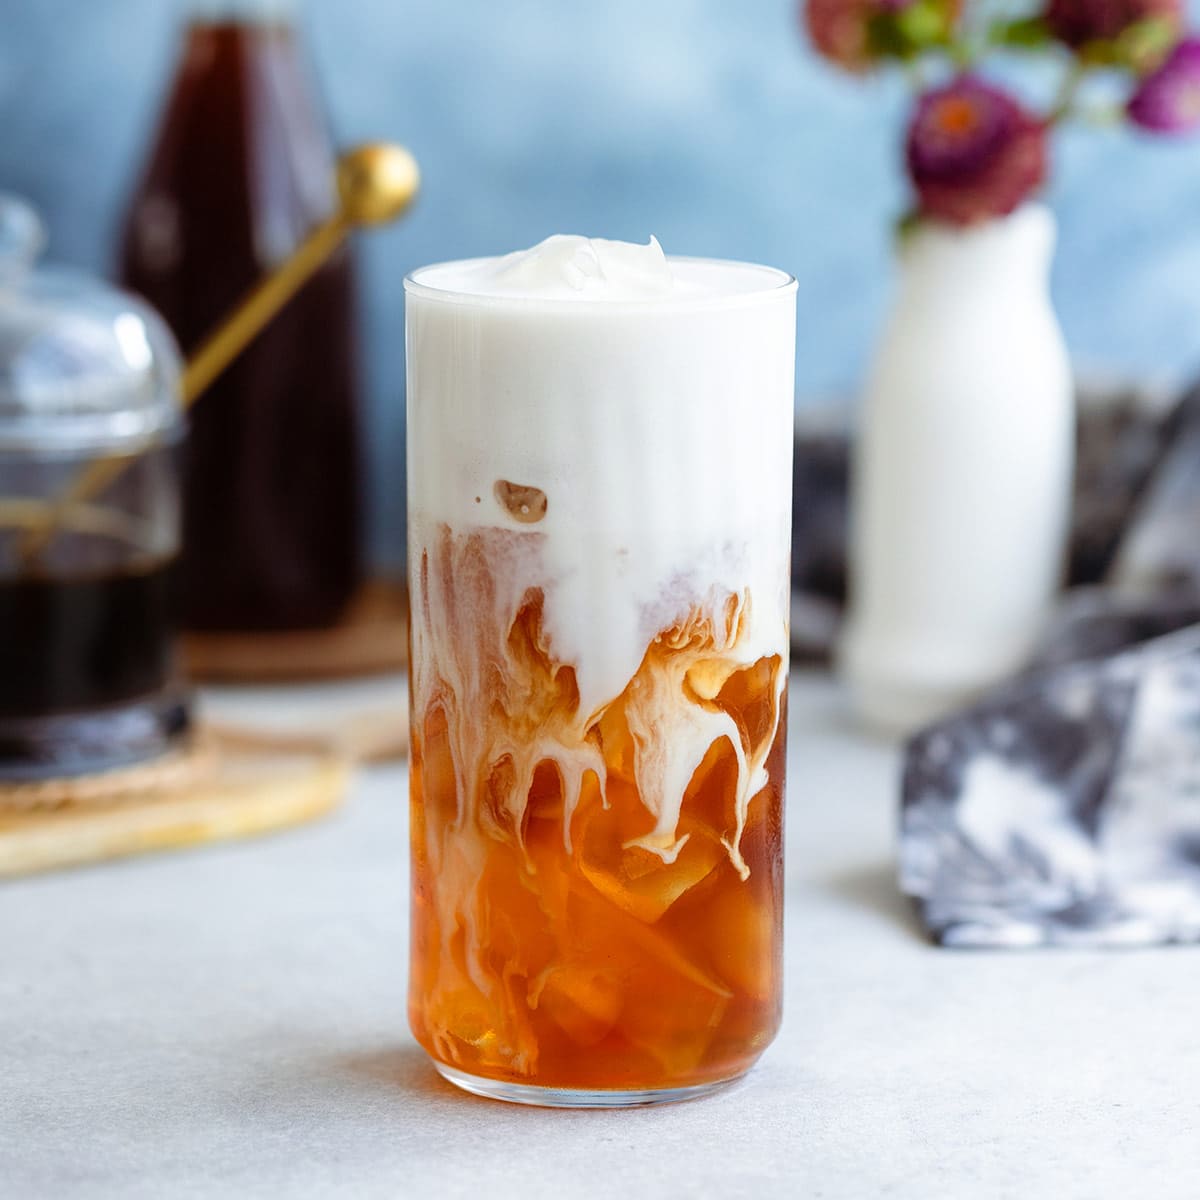 Iced earl grey tea in a tall glass with ice and frothy milk on top.